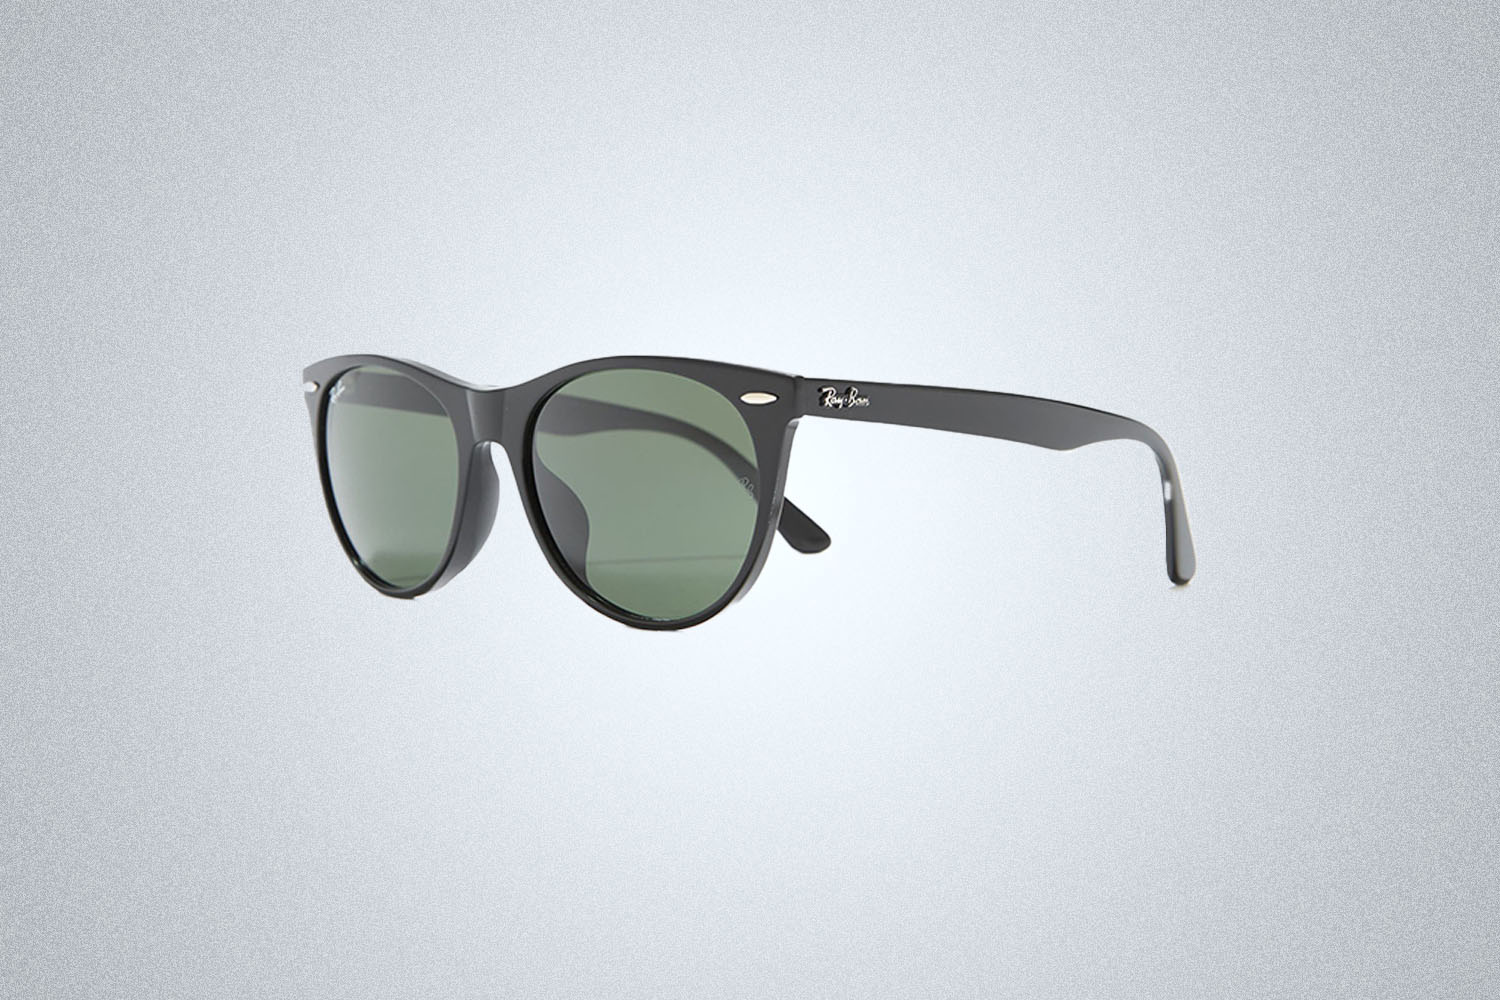 A pair of sunglasses on a gray background